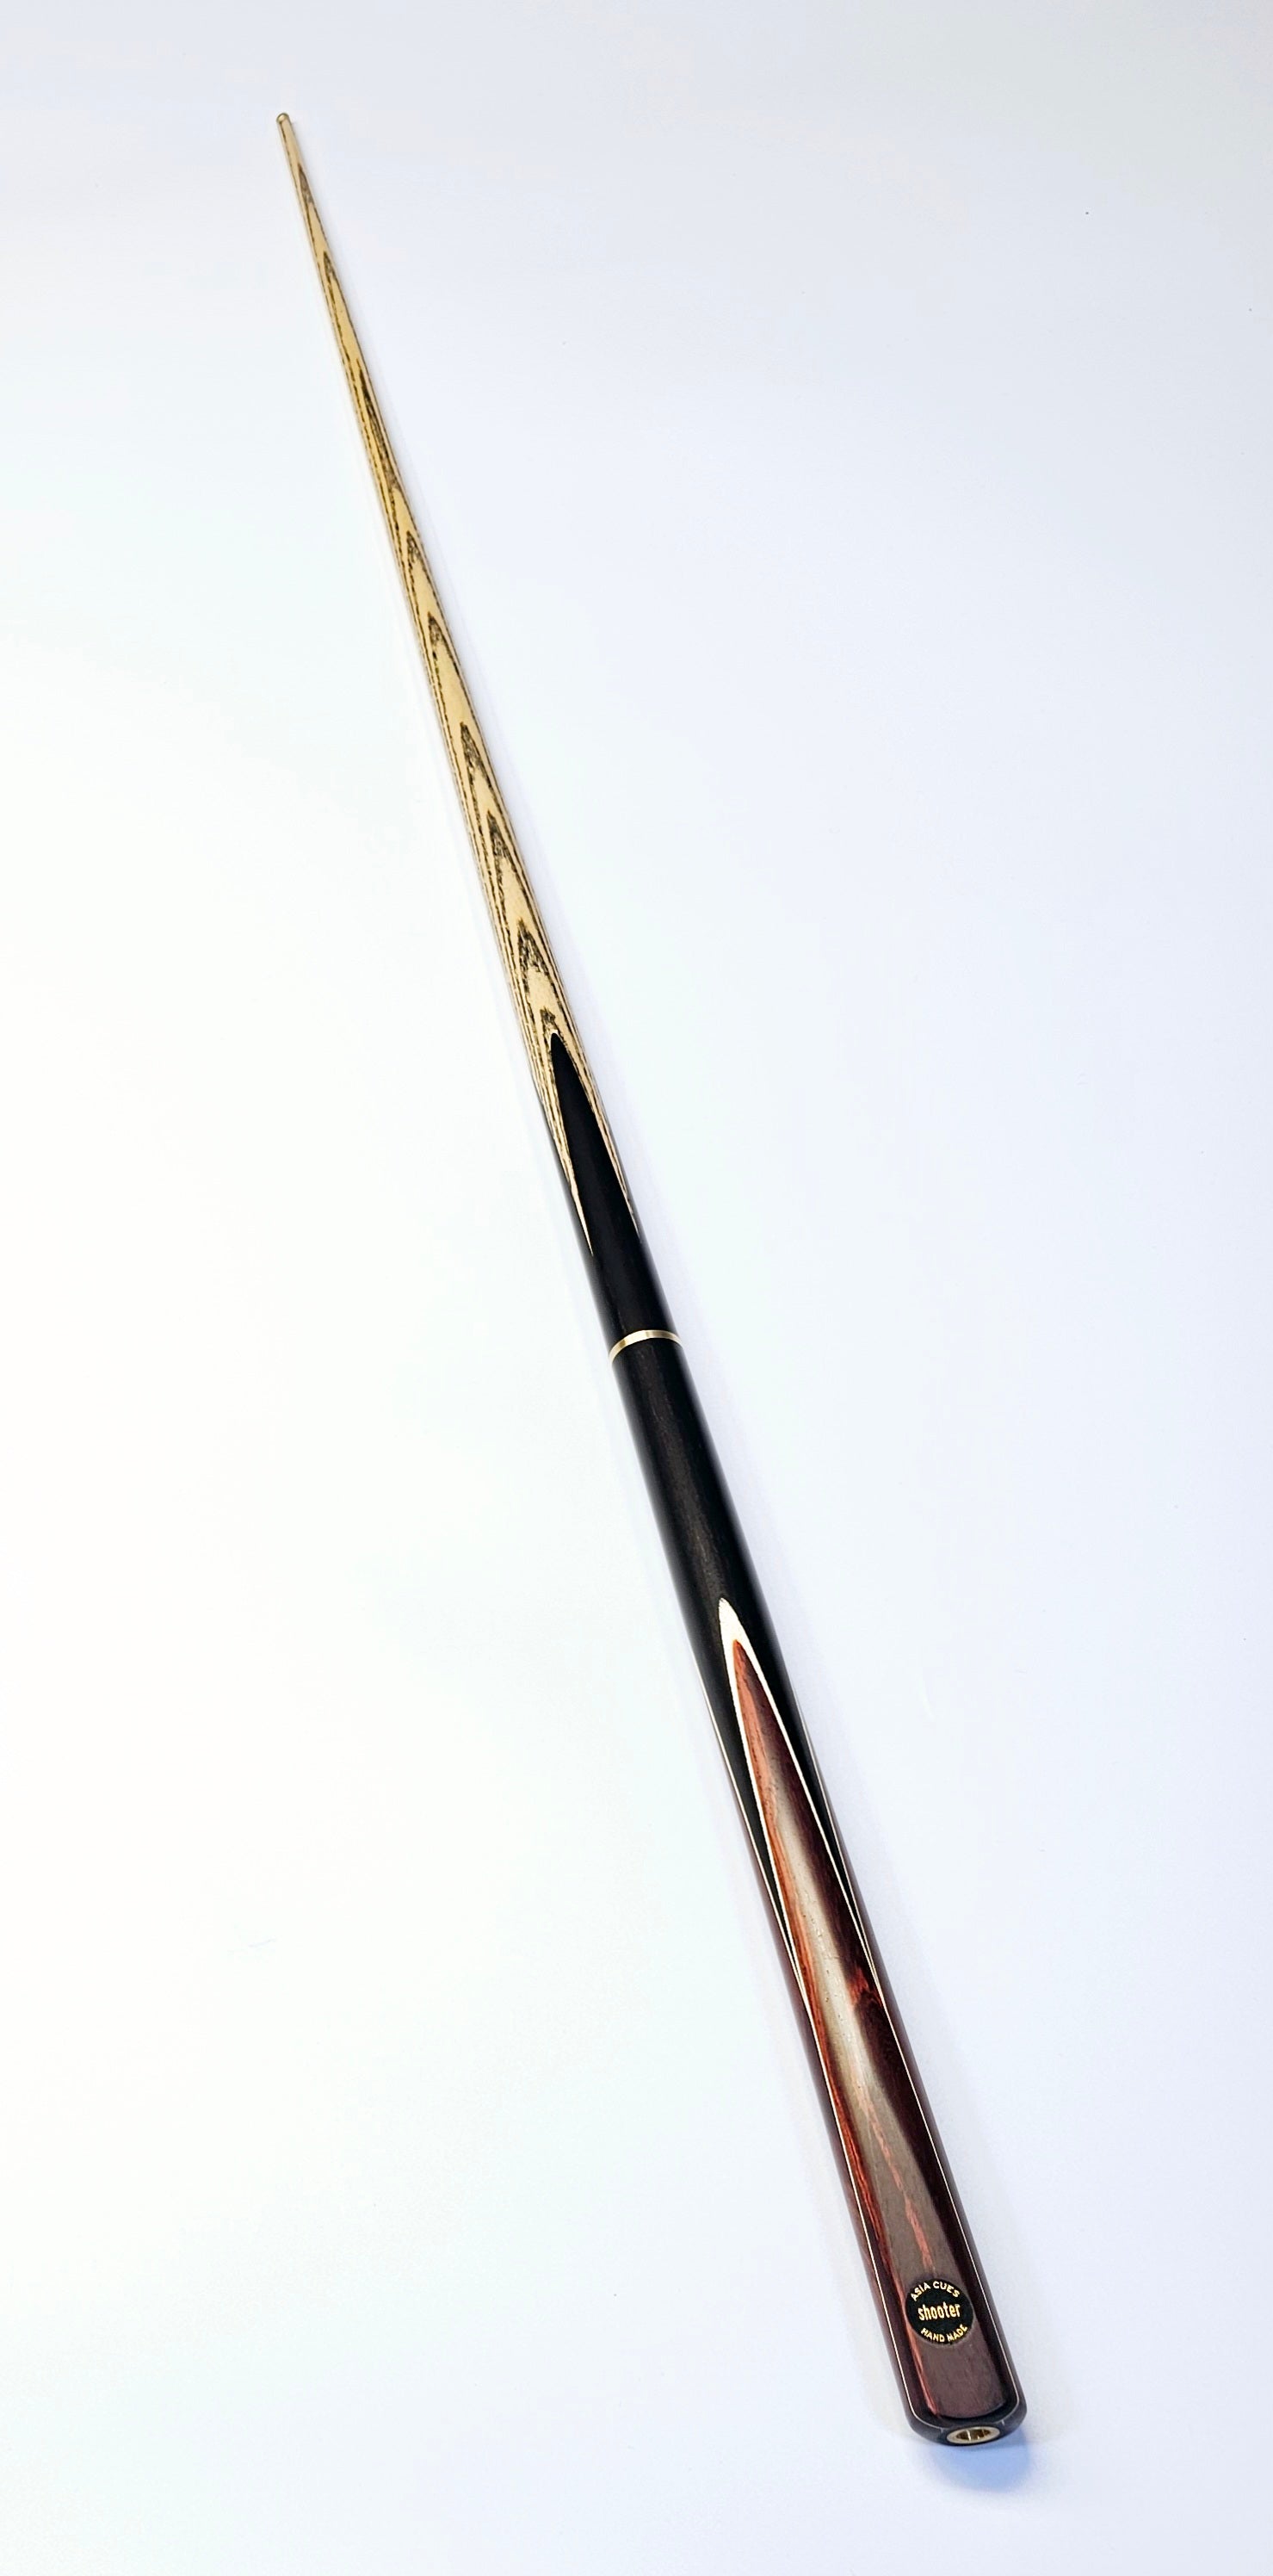 Asia Cues Shooter - 3/4 Jointed Snooker Cue 9.6mm Tip, 18.1oz, 58"